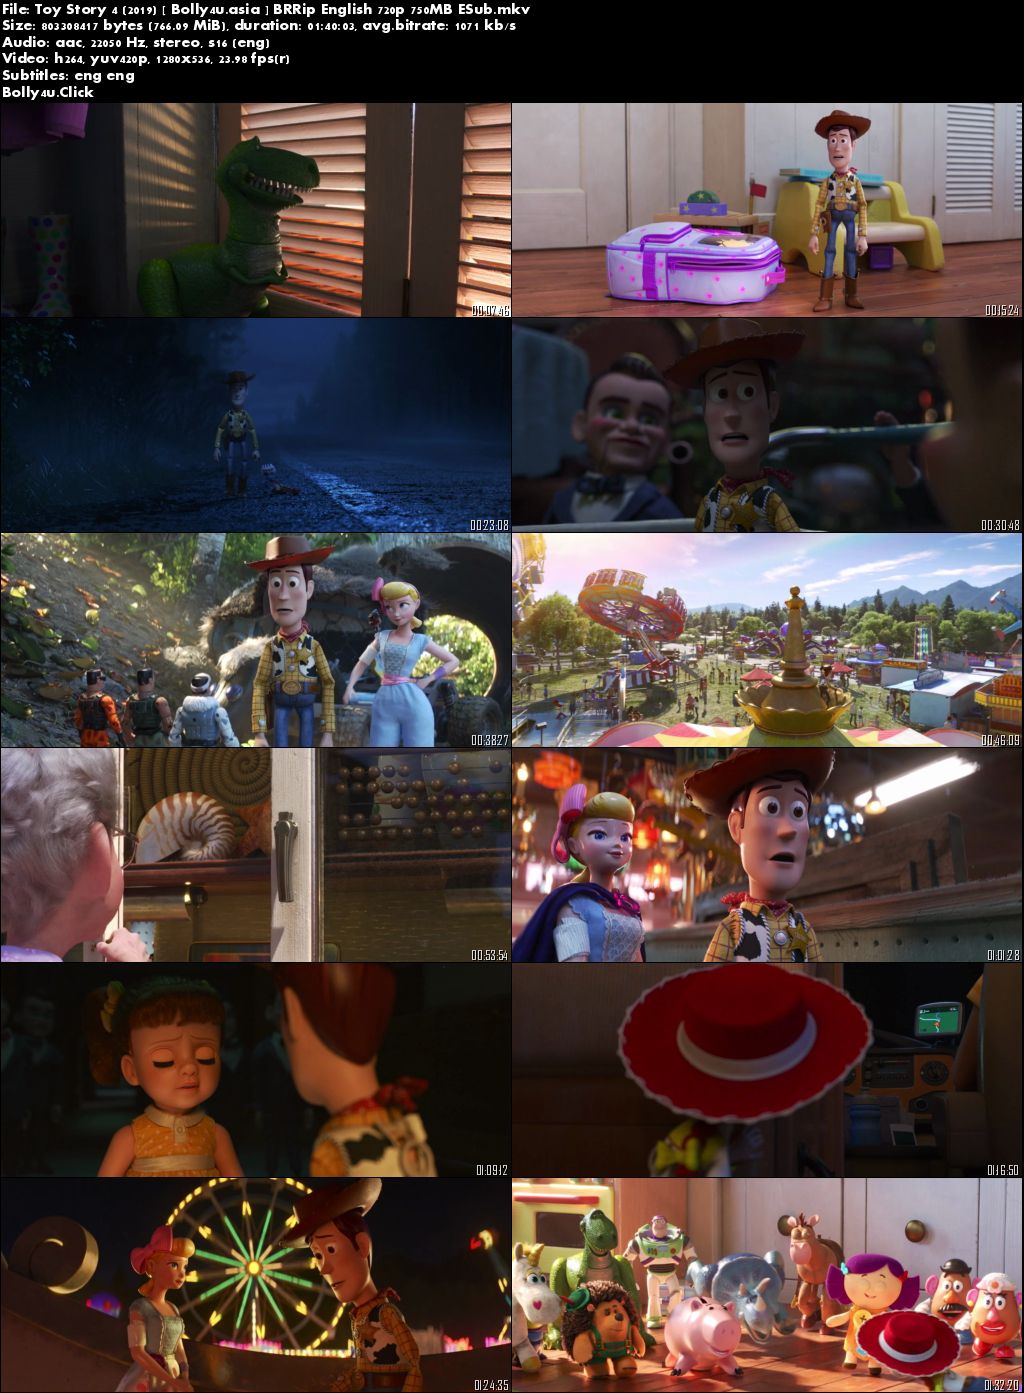 Toy Story 4 2019 BRRip 750Mb English 720p ESub Watch Online Full Movie Download